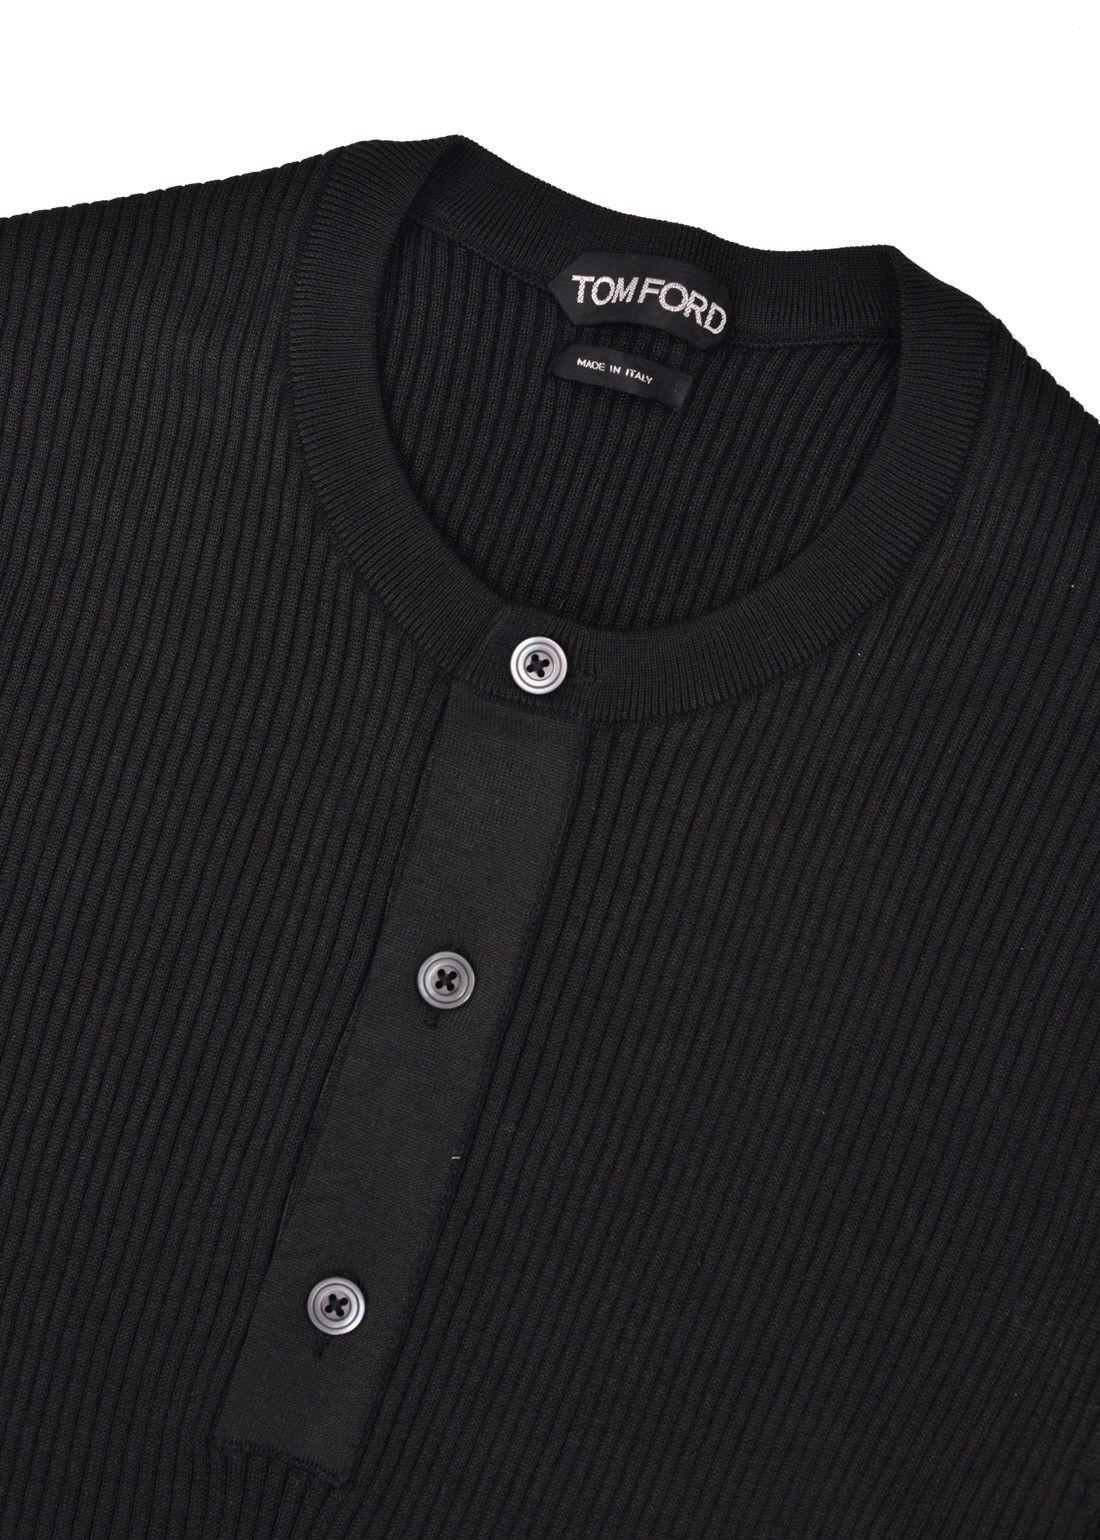 Tom Ford's luxurious ribbed sweater with three button accents. This classic Tom Ford ribbed sweater is crafted from soft cashmere blend for a gentle and luxurious feel to the skin. Perfect for this winter and fall season, pair with regular jeans or